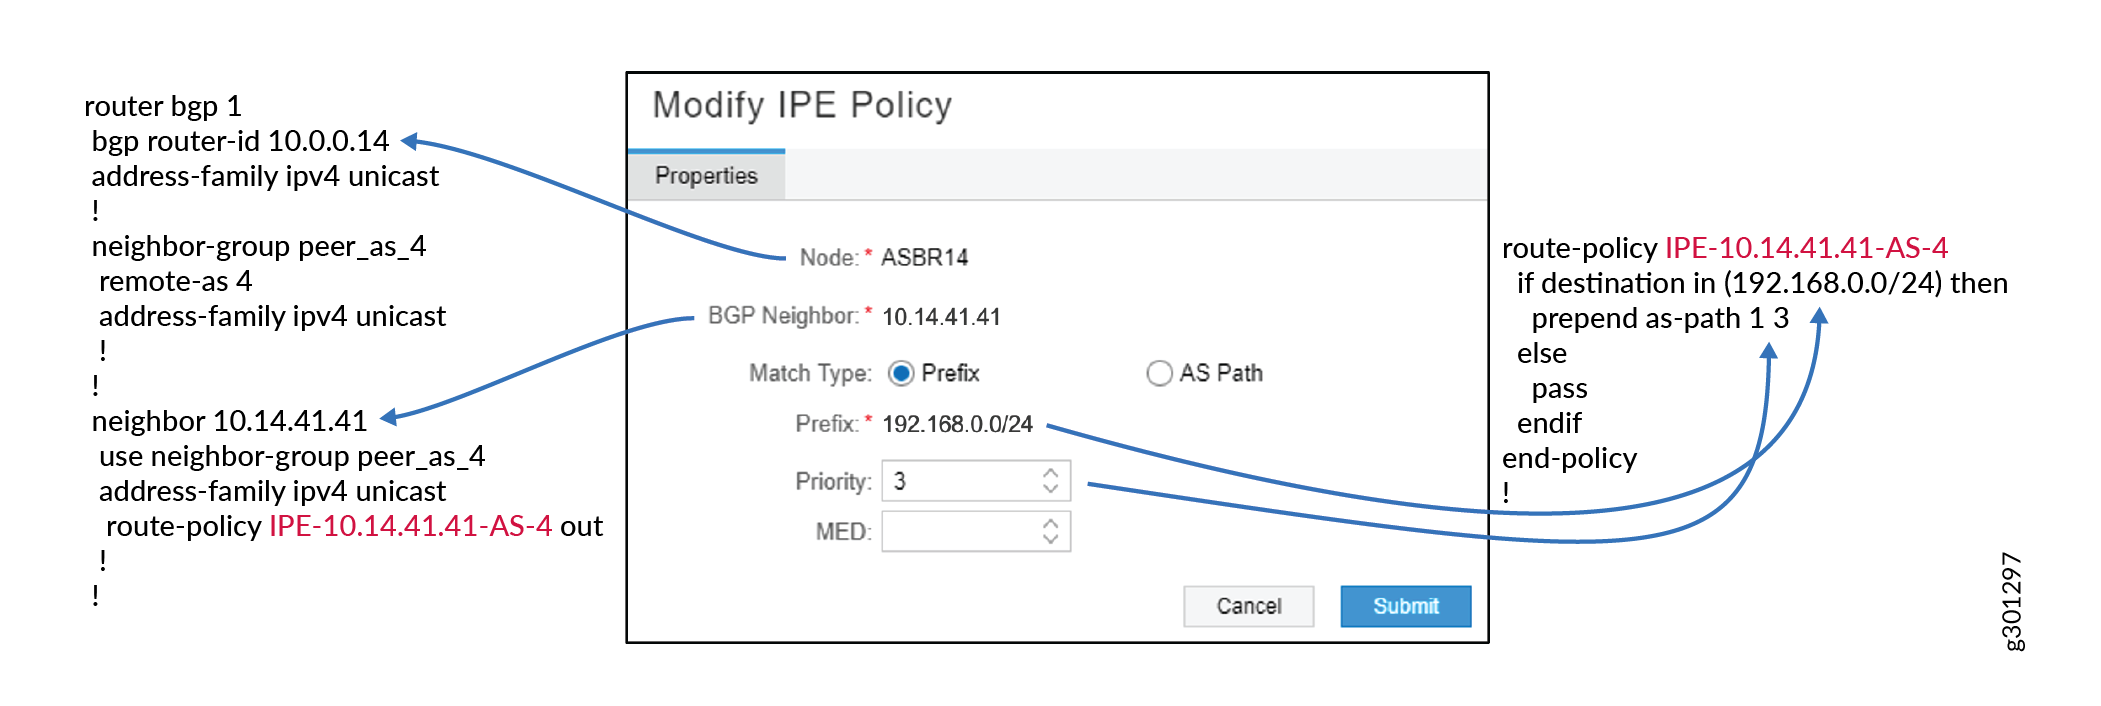 Mapping of the Modify IPE Policy
Window to IOS-XR Configuration